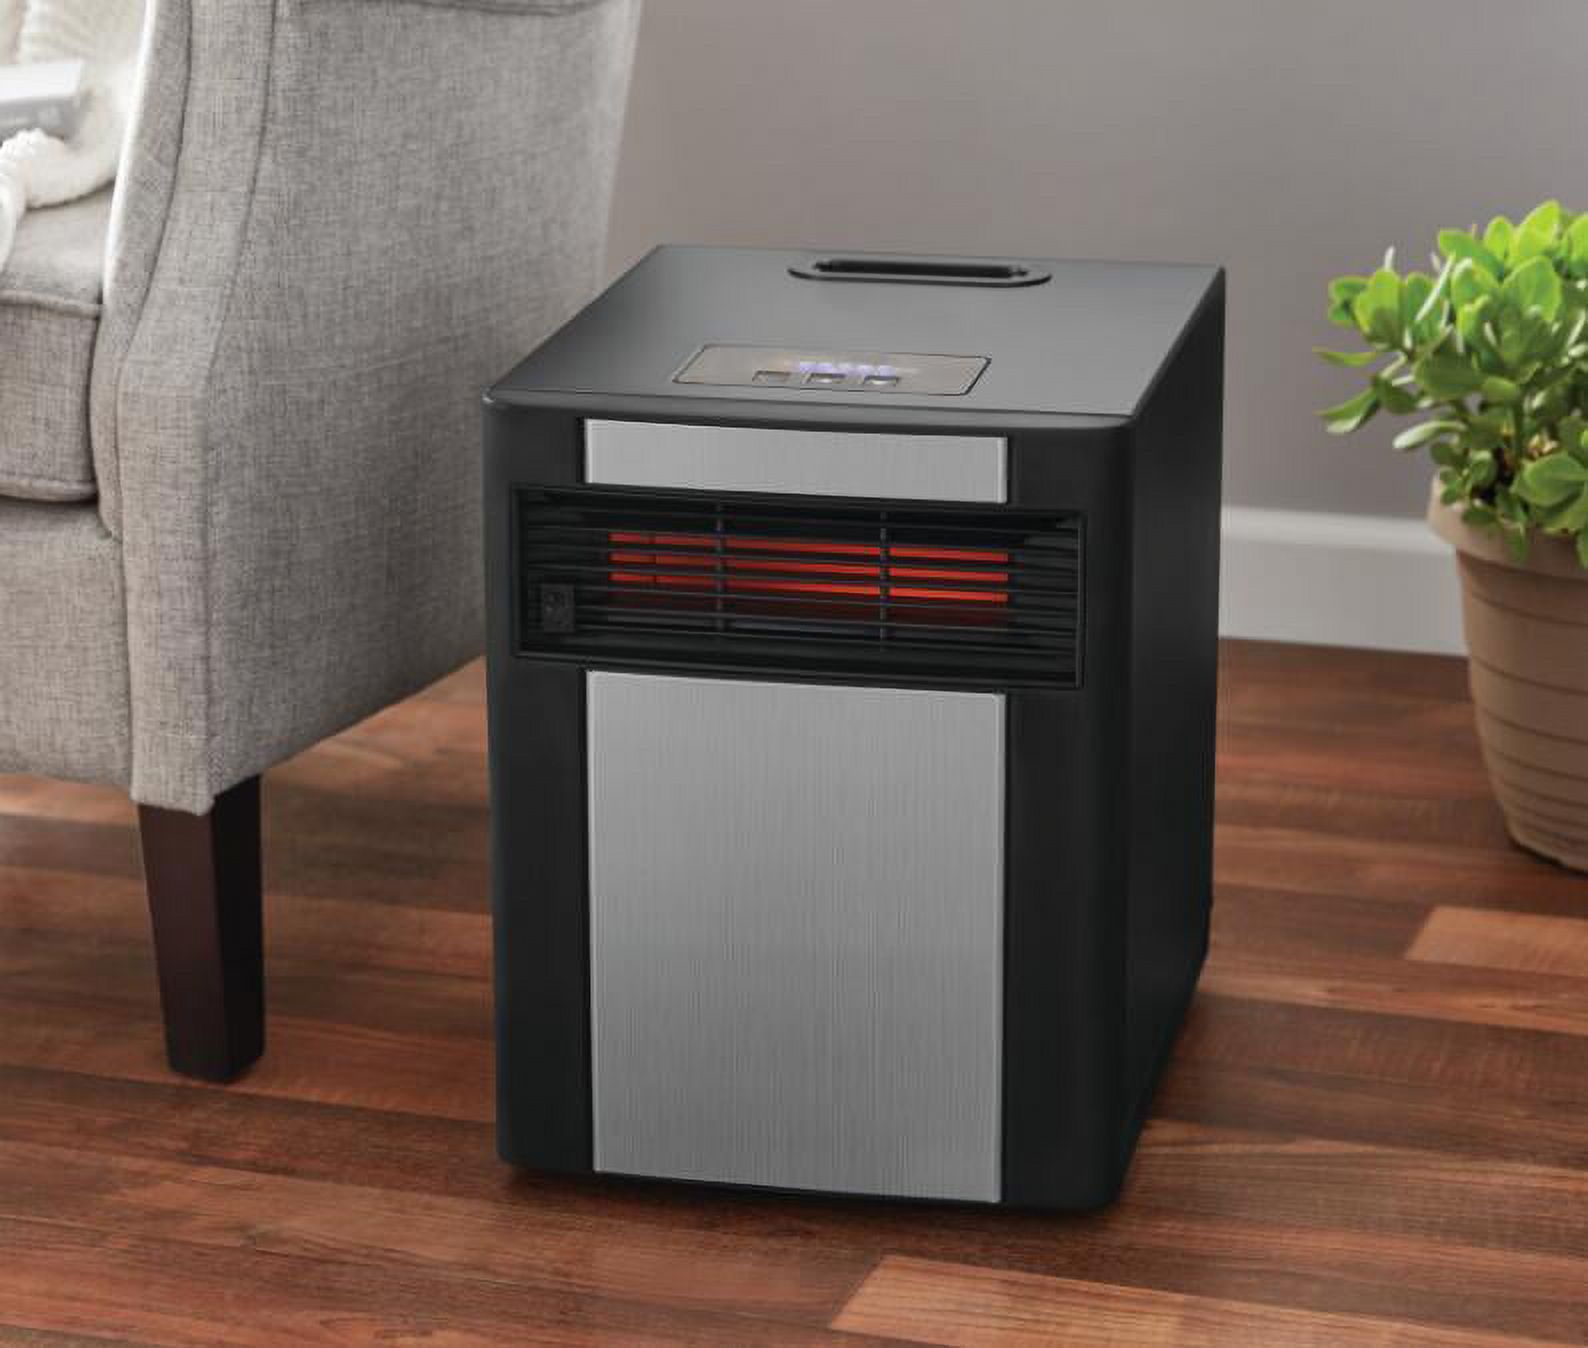 Mainstays Infrared Electric Cabinet Heater, Black/Grey, DF1515 - image 4 of 7